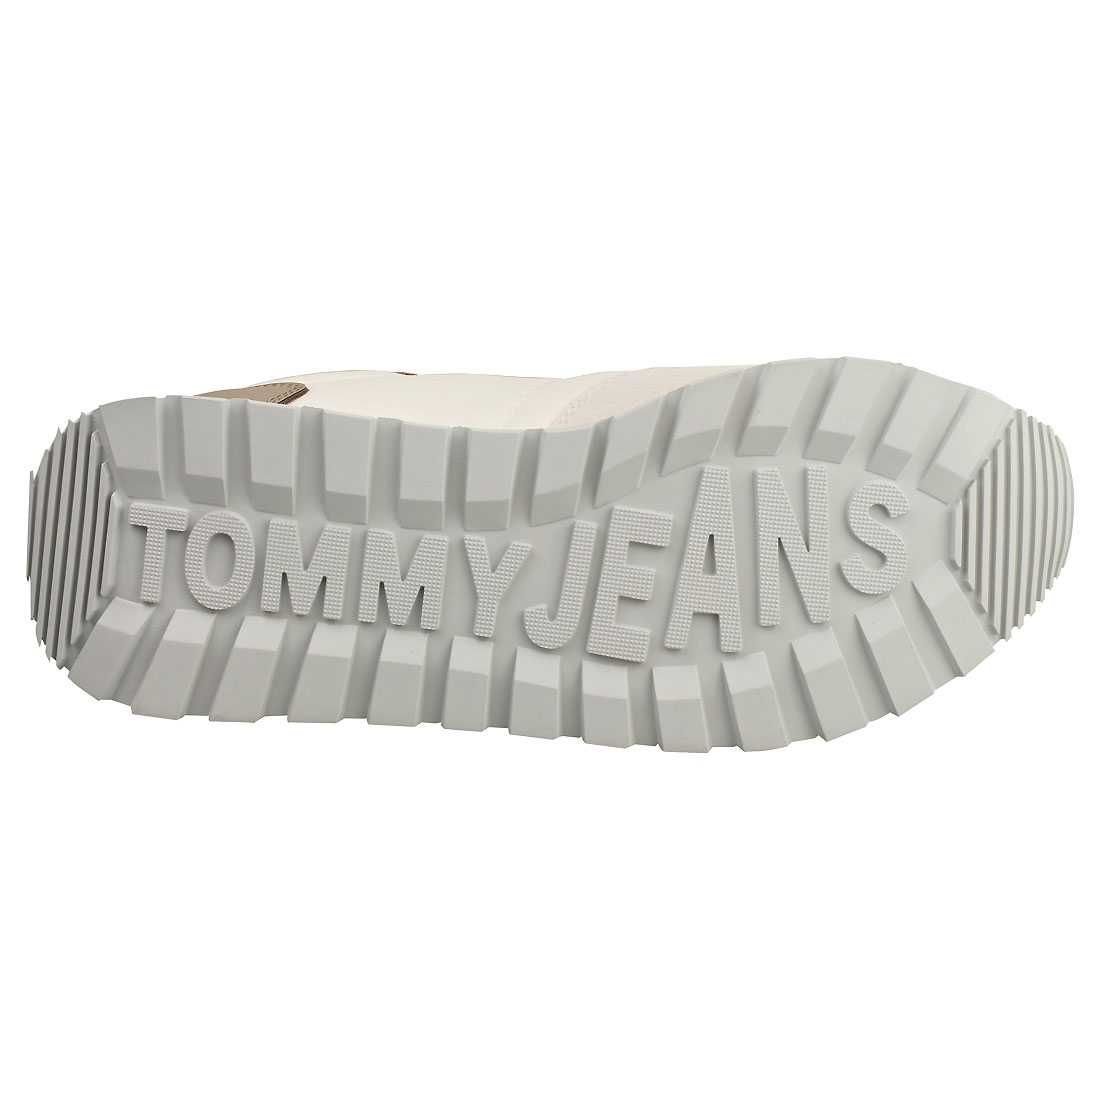 Tommy Jeans RUNNER Casual Trainers Оригинал Код 806